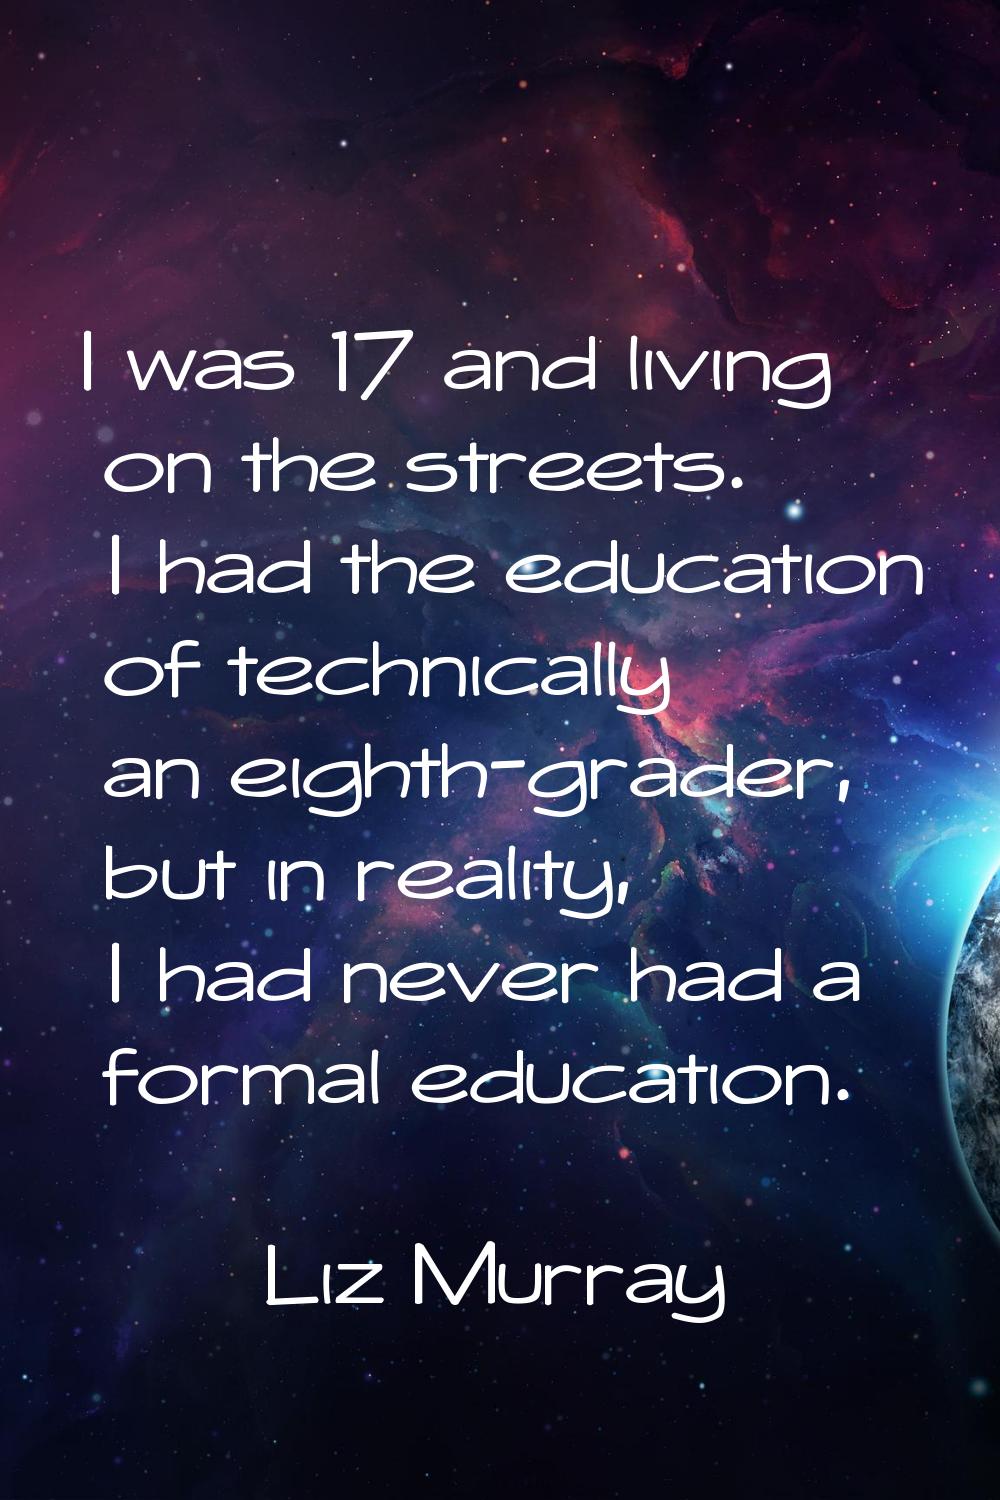 I was 17 and living on the streets. I had the education of technically an eighth-grader, but in rea